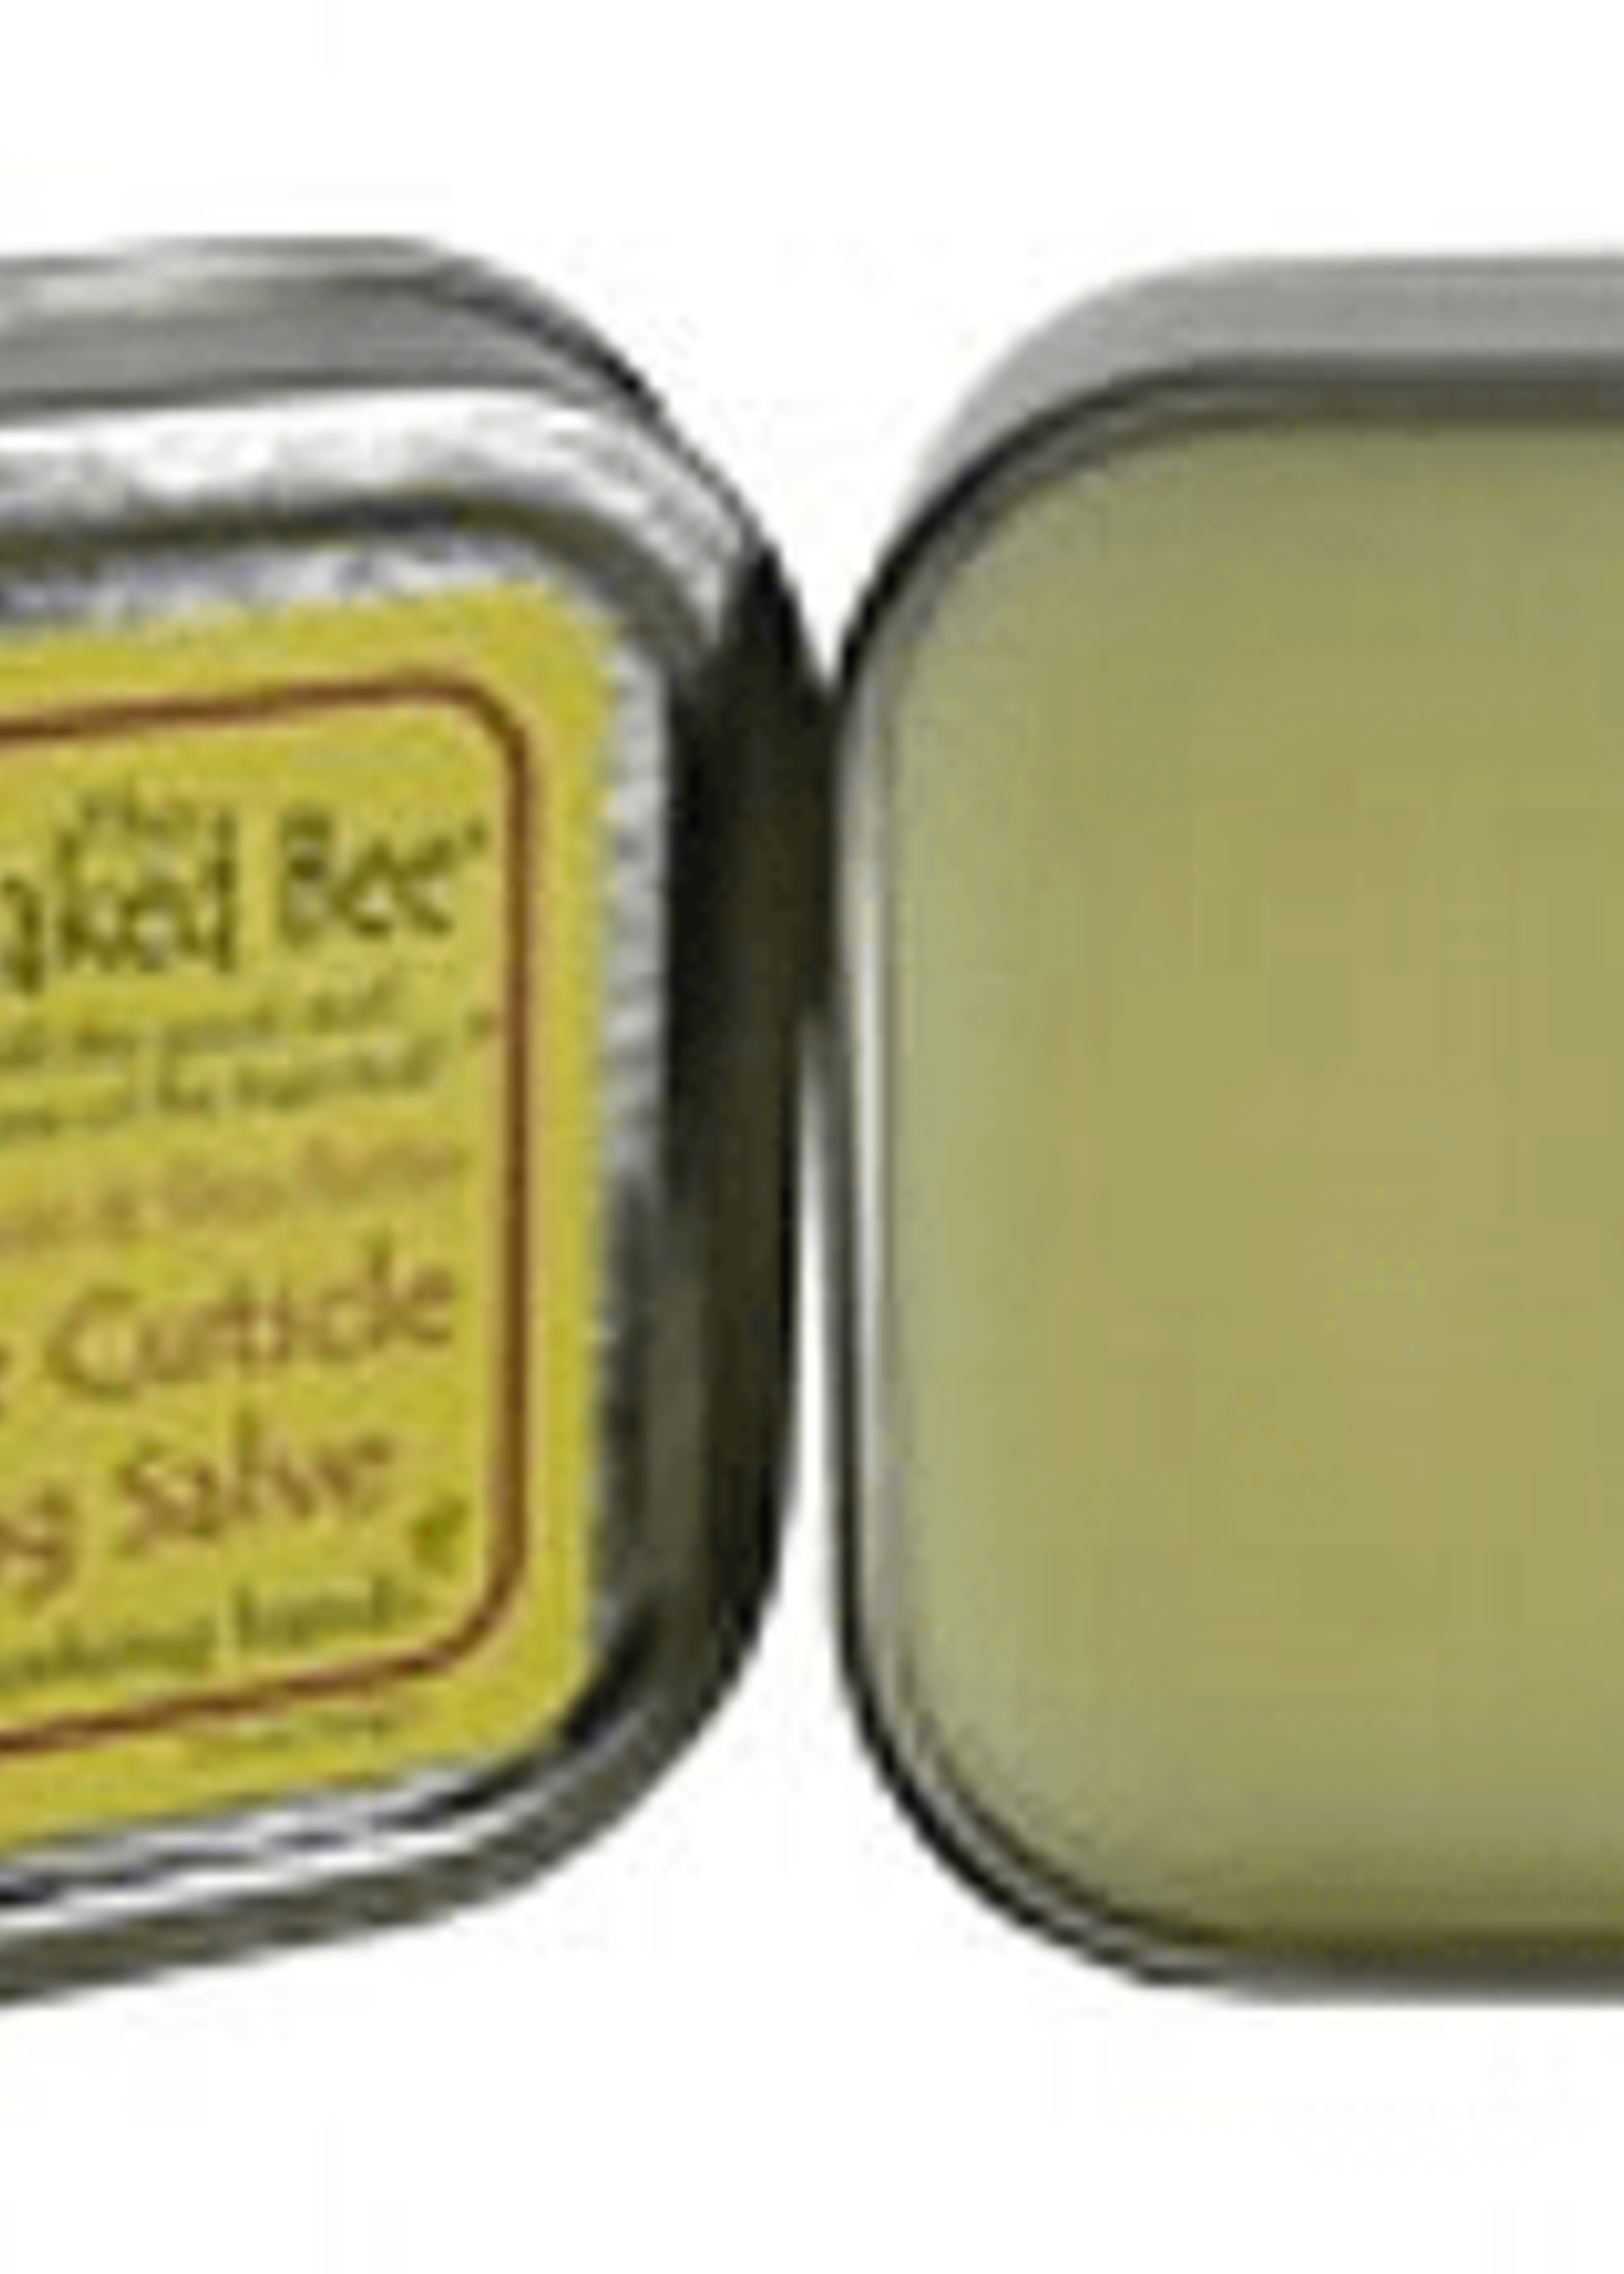 NAKED BEE HAND AND CUTICLE HEALING SALVE